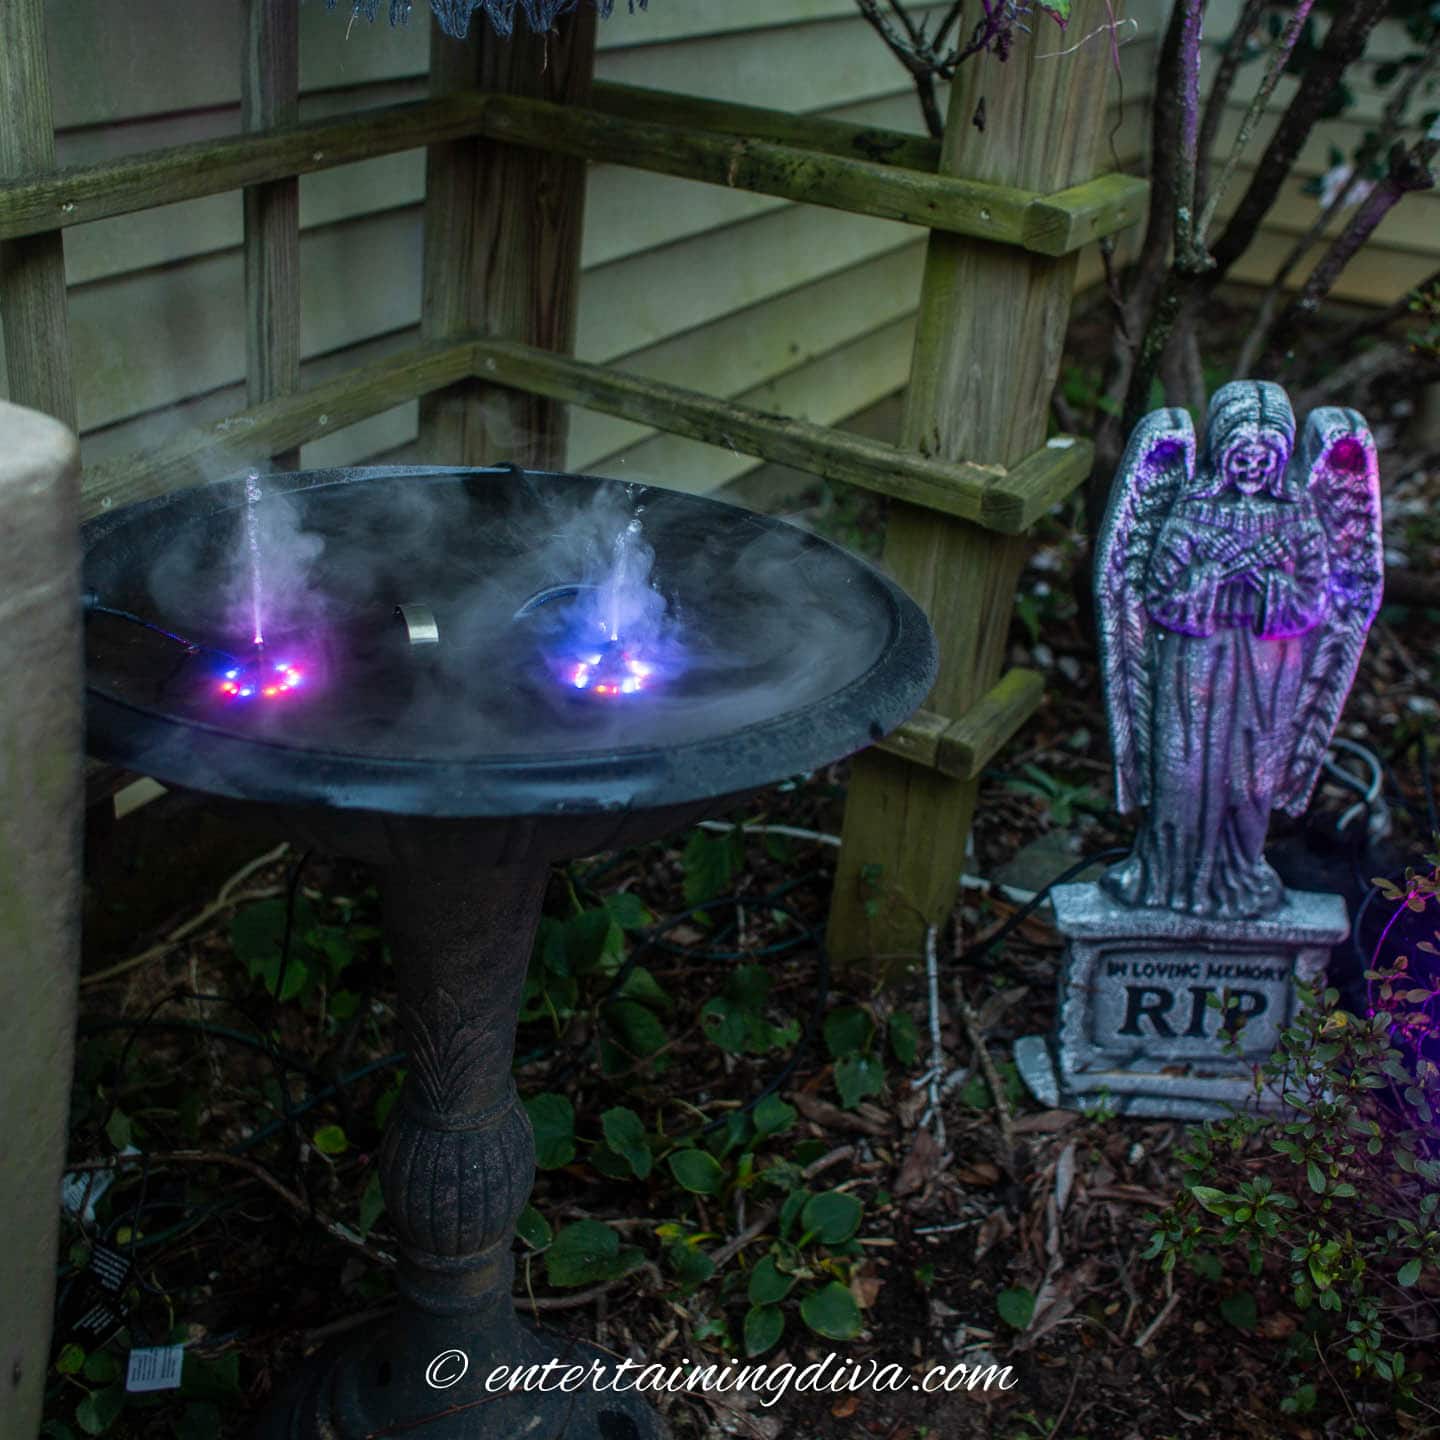 A Halloween-themed birdbath with 2 misters creating purple light and a statue of an angel.